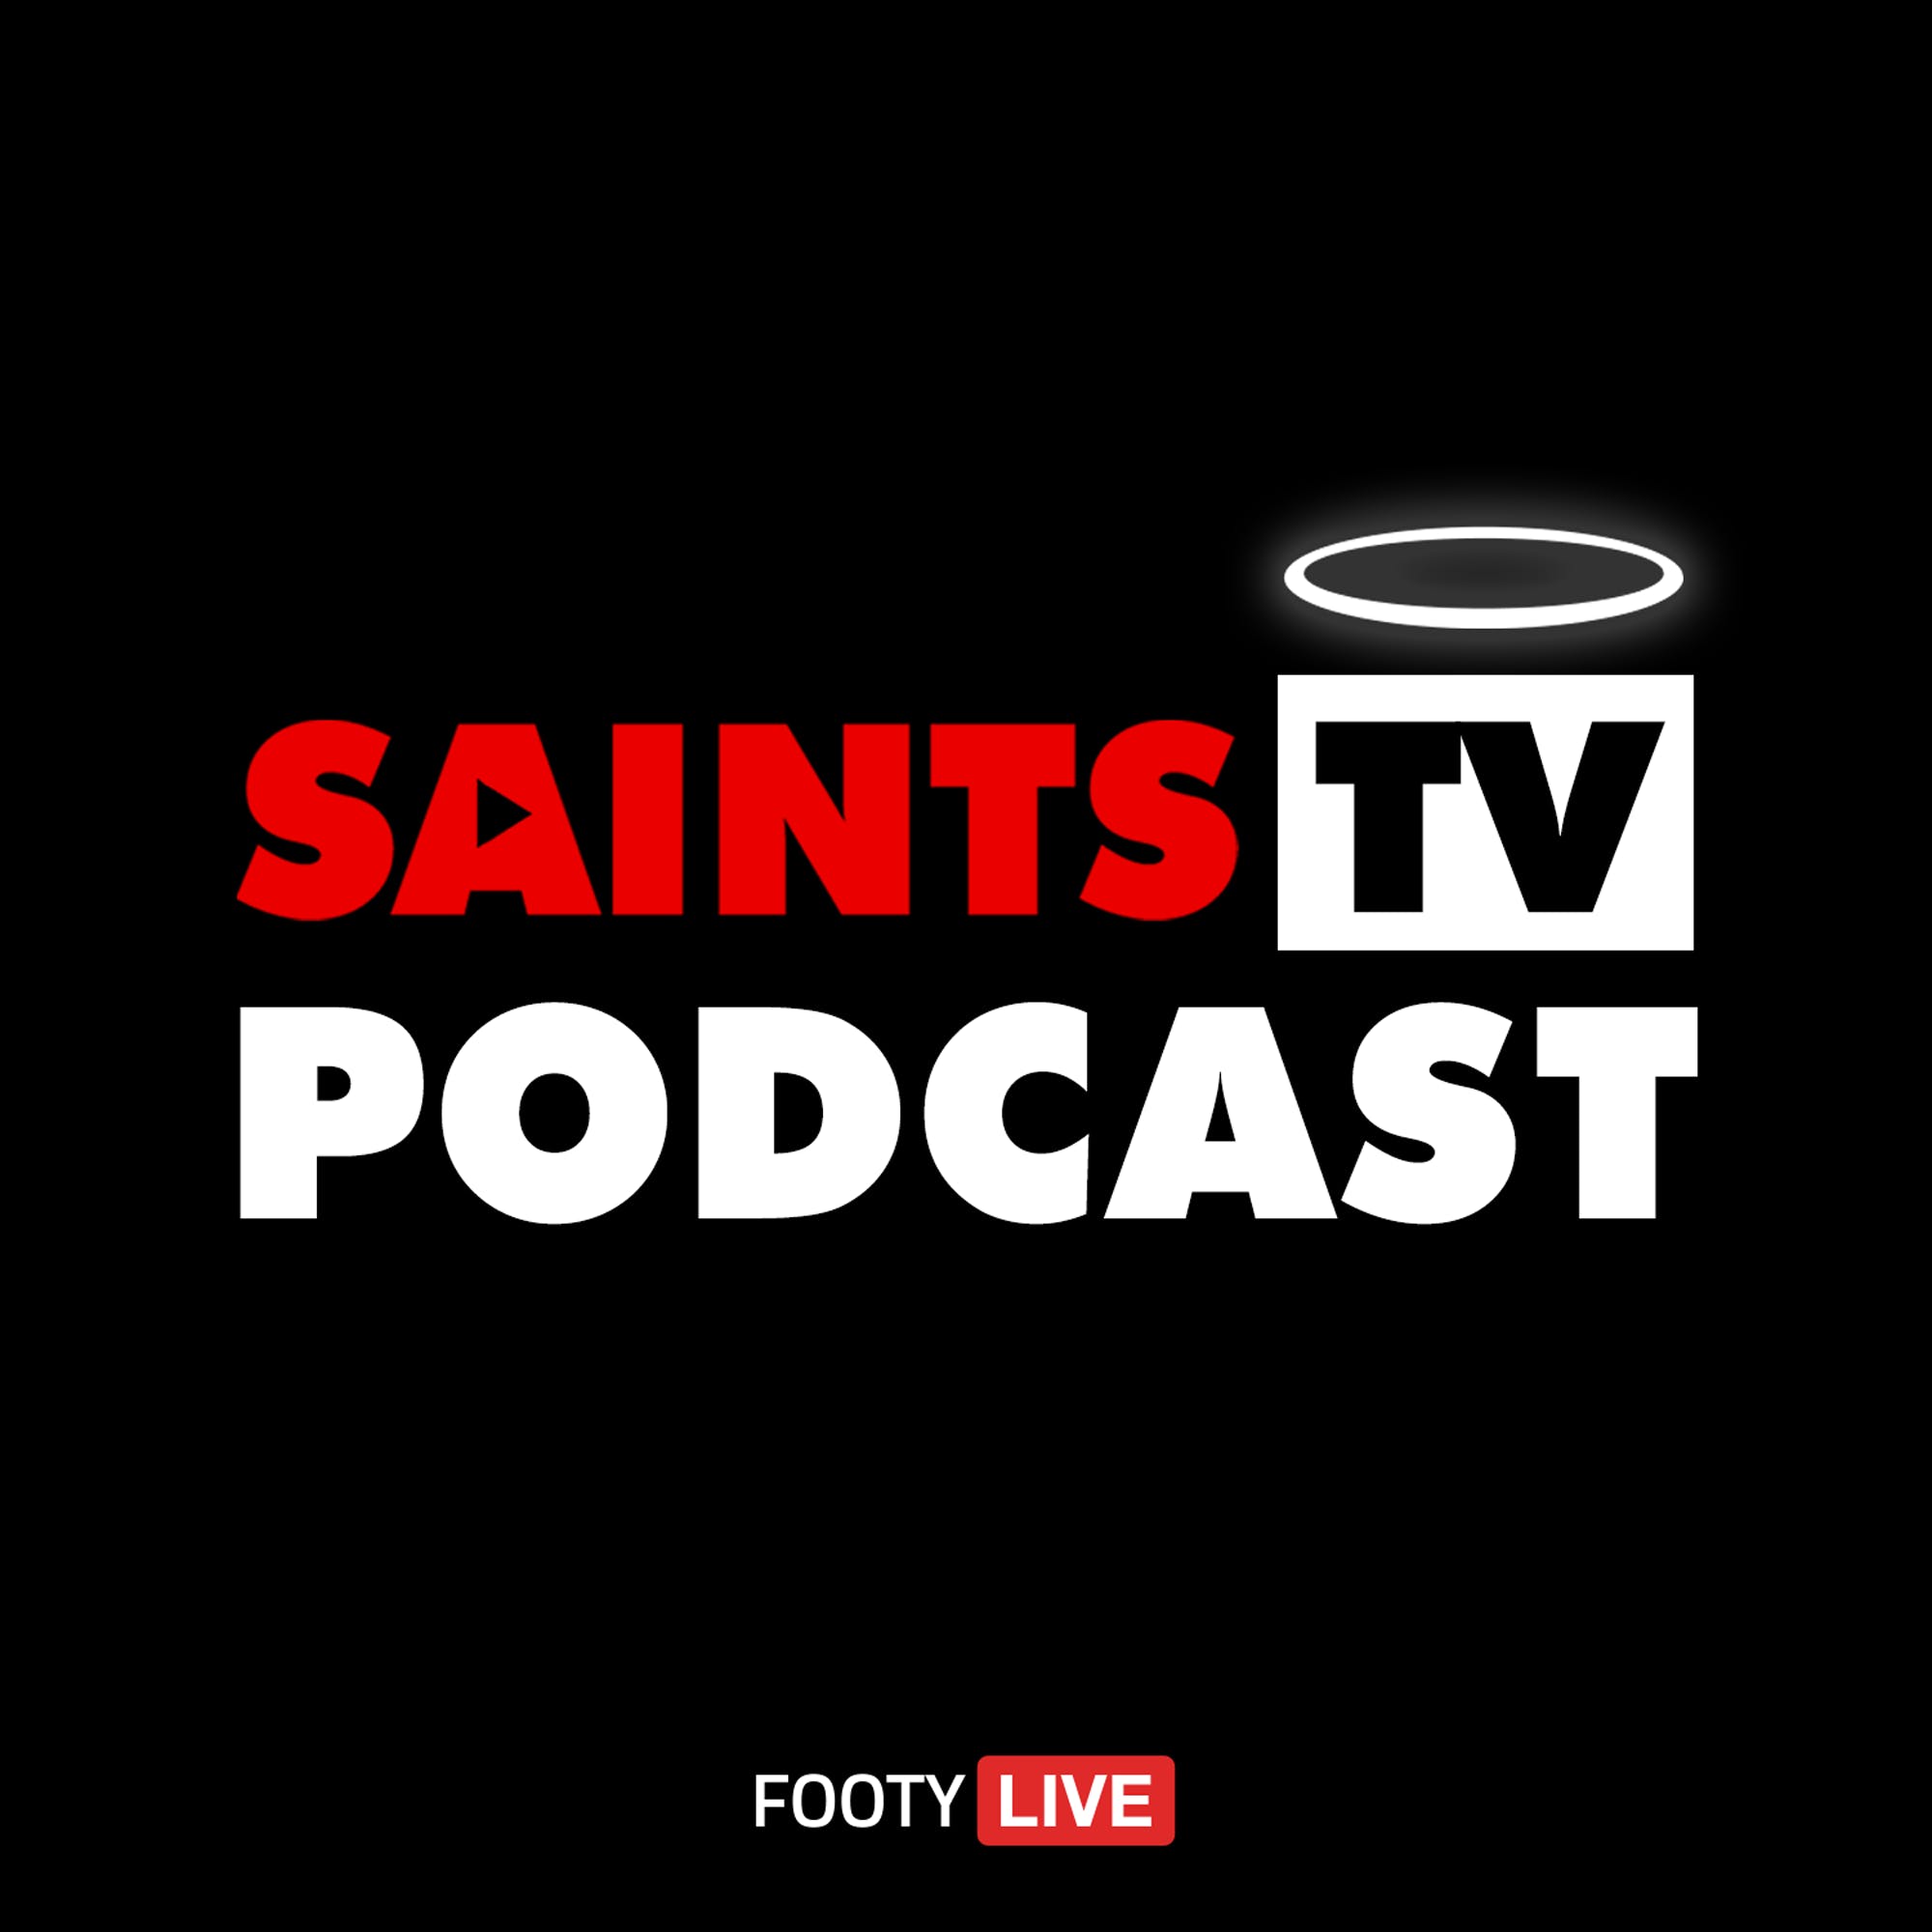 Saints TV Podcast | EP 131: Fit, Fast and Furious